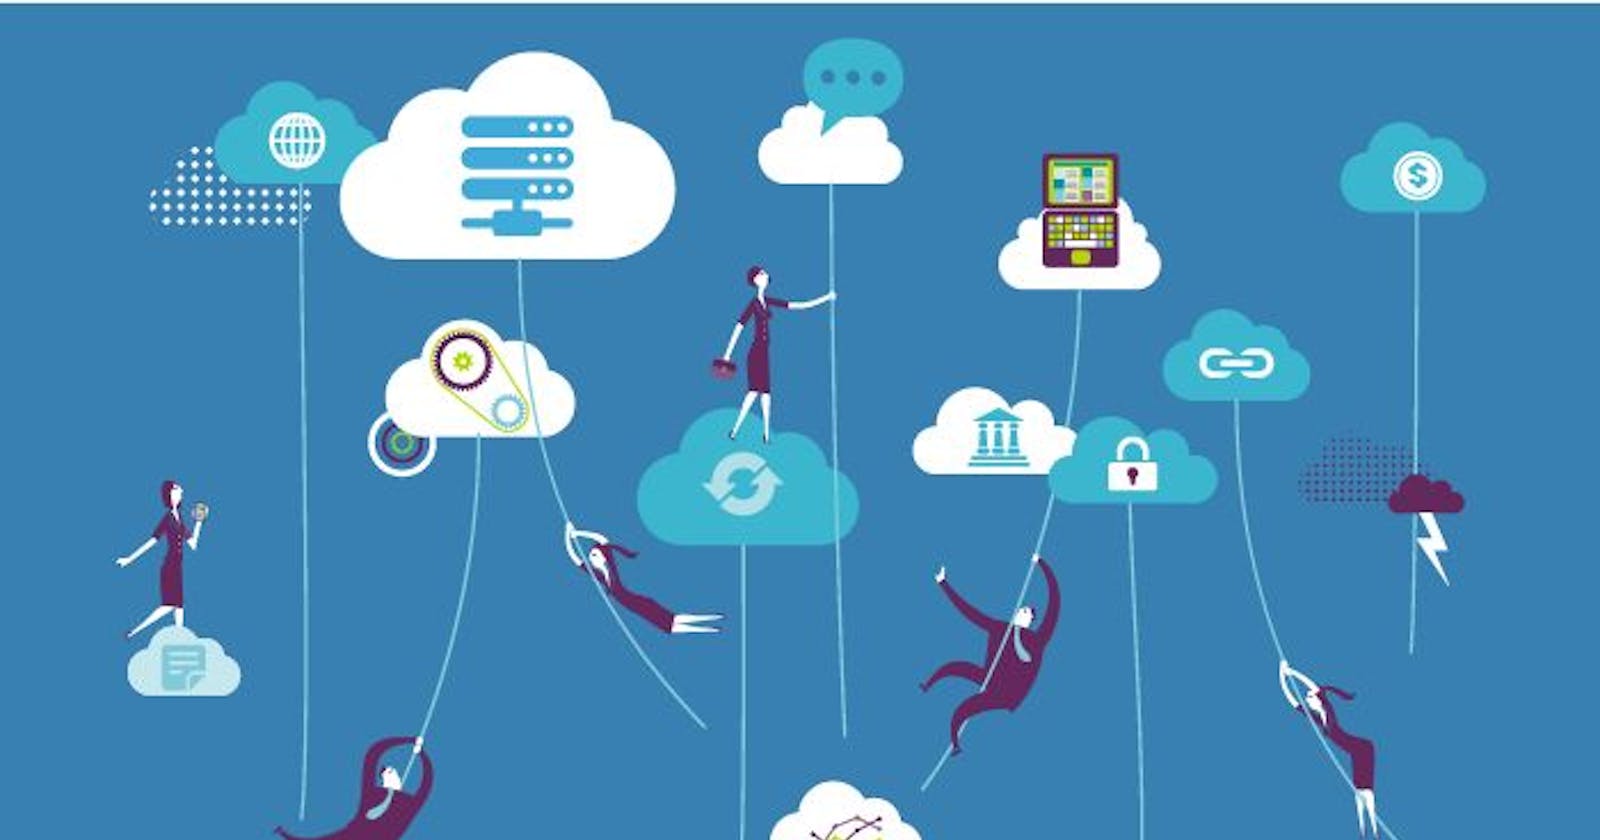 How to get started with Cloud Computing